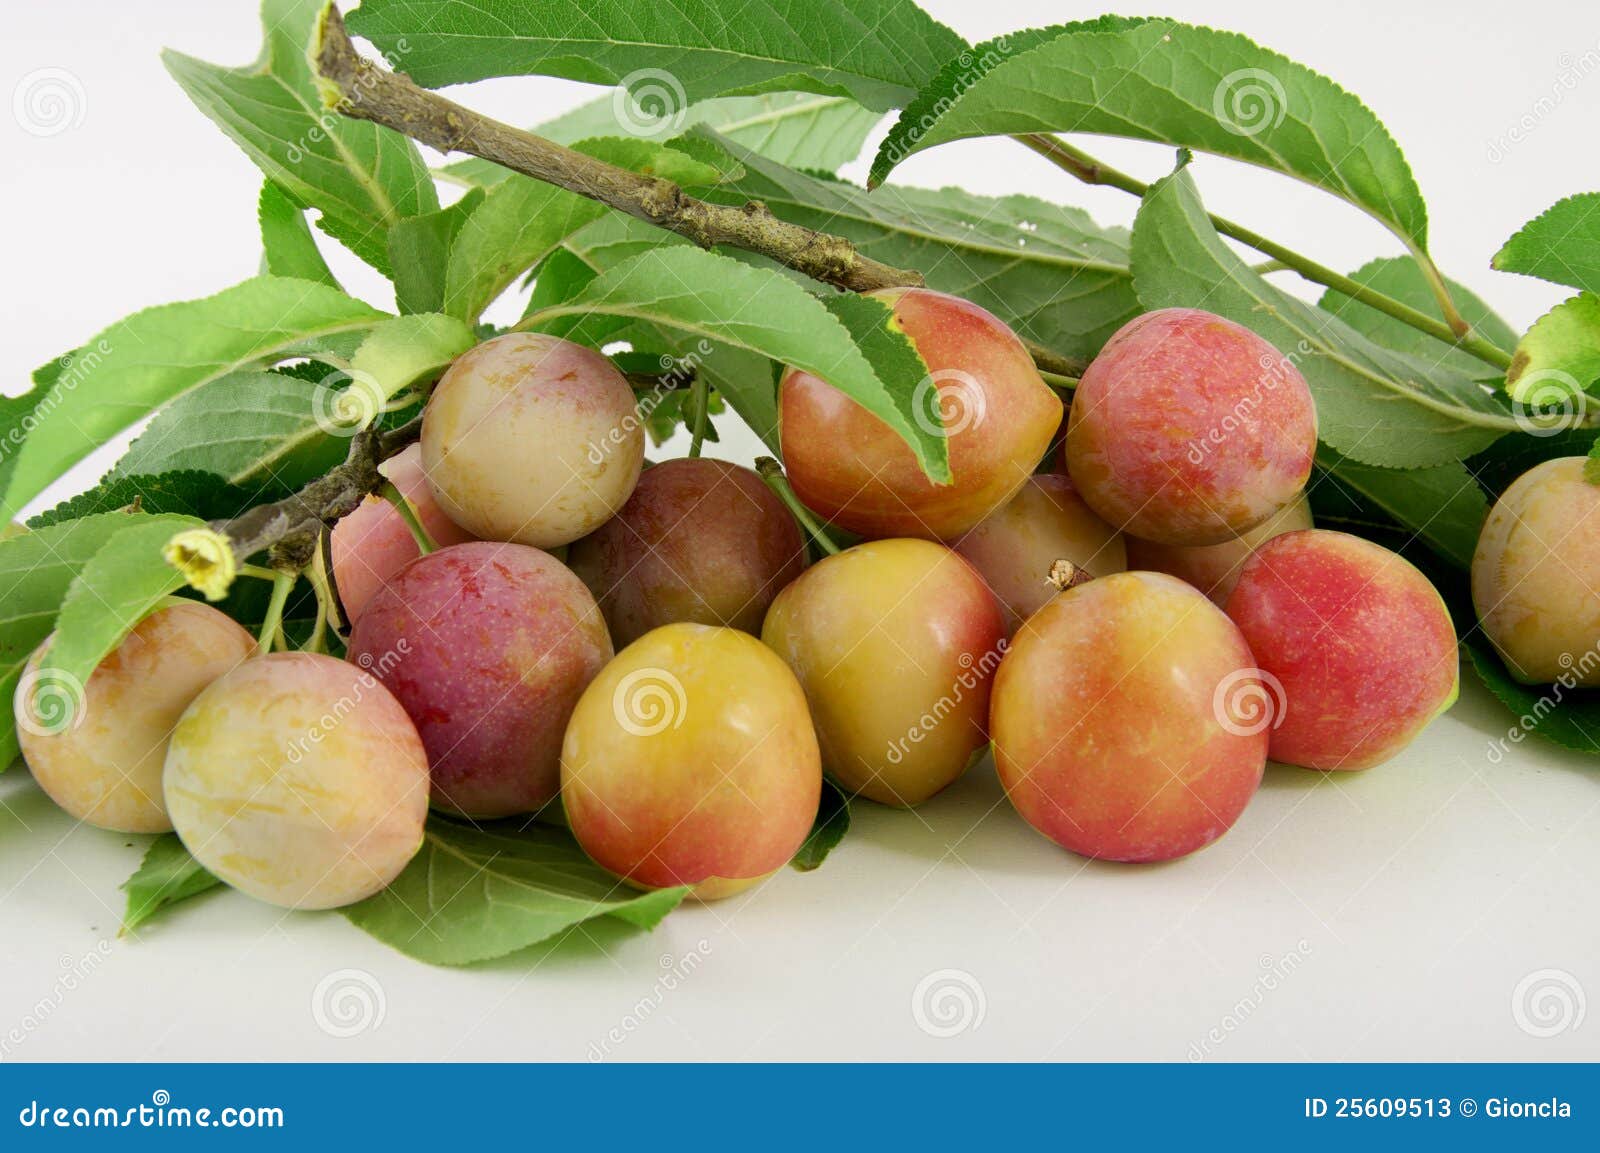 yellow plums on branch with verdigris